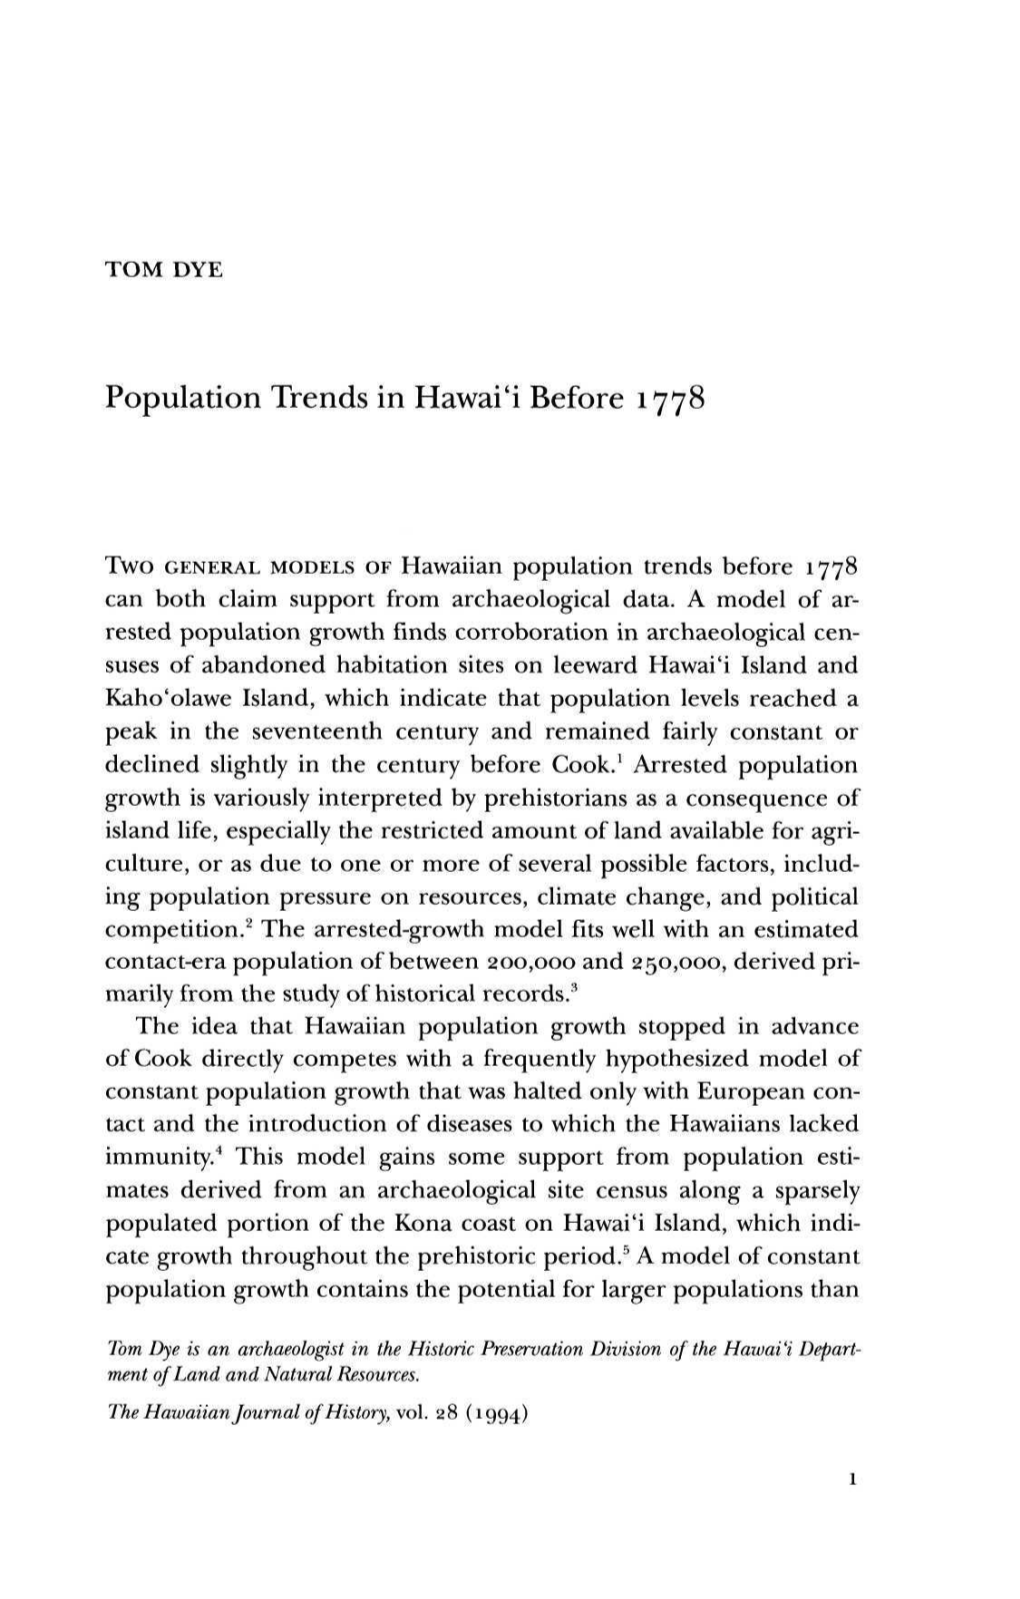 Population Trends in Hawai'i Before 1778